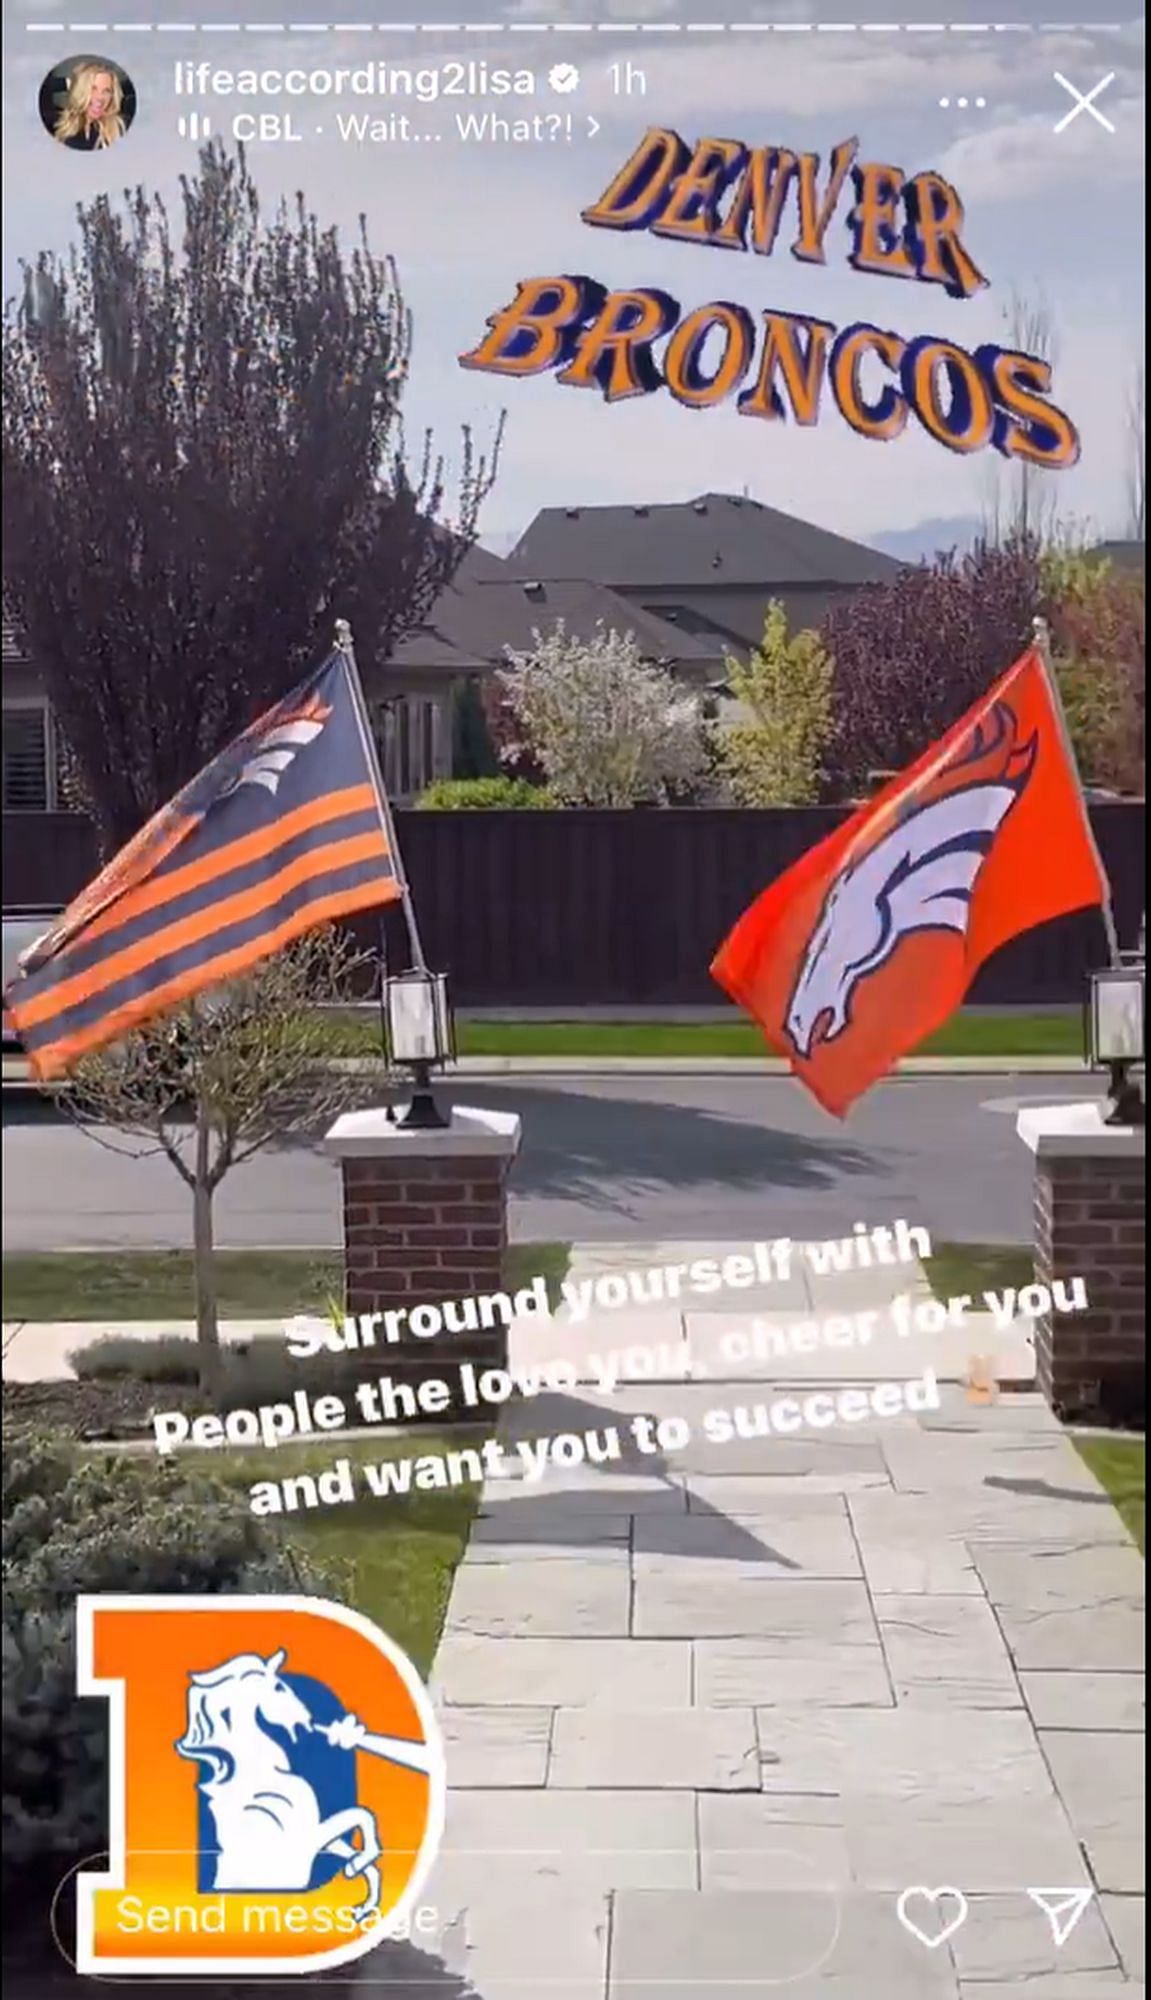 Lisa Wilson reacts to her son Zach joining the Denver Broncos